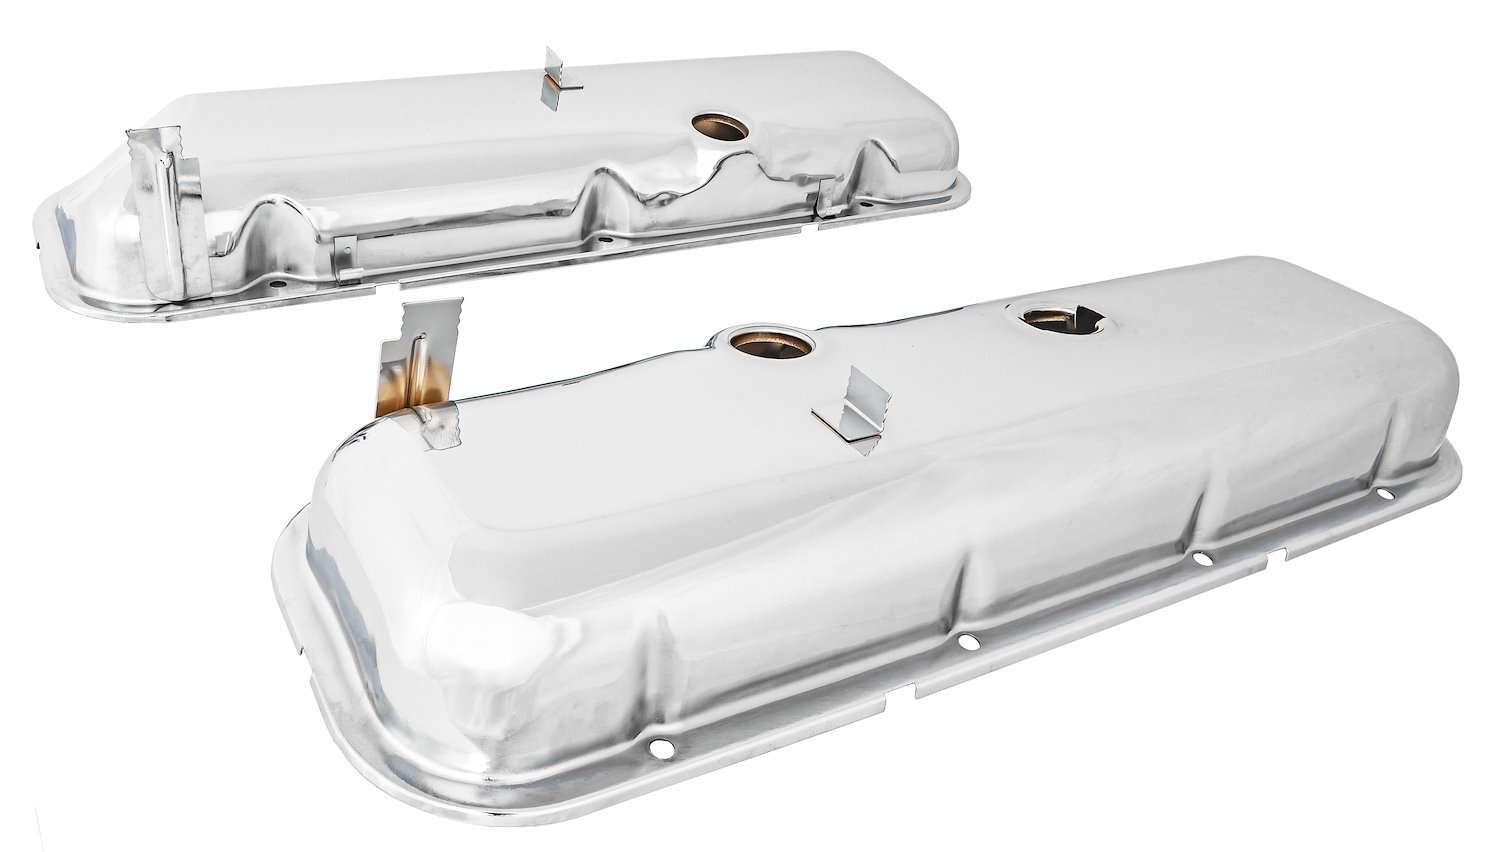 OEM-Style Replacement Valve Covers for 1965-1972 Chevrolet Models w/Big Block 396, 402, 427, 454 Engines & Power Brakes [Chrome]